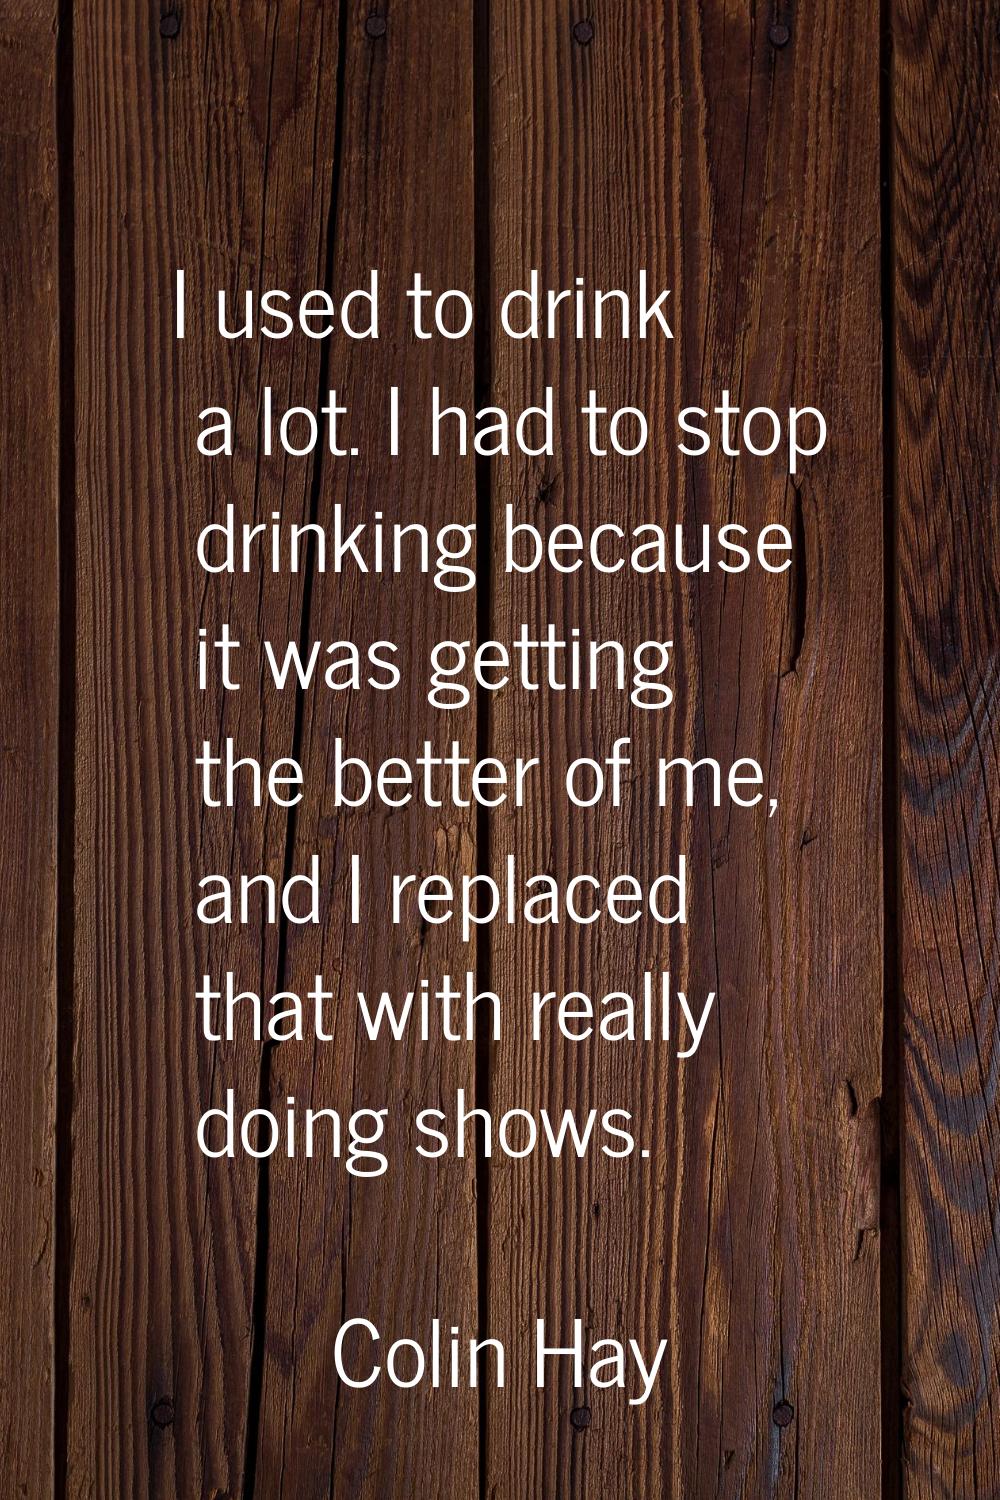 I used to drink a lot. I had to stop drinking because it was getting the better of me, and I replac